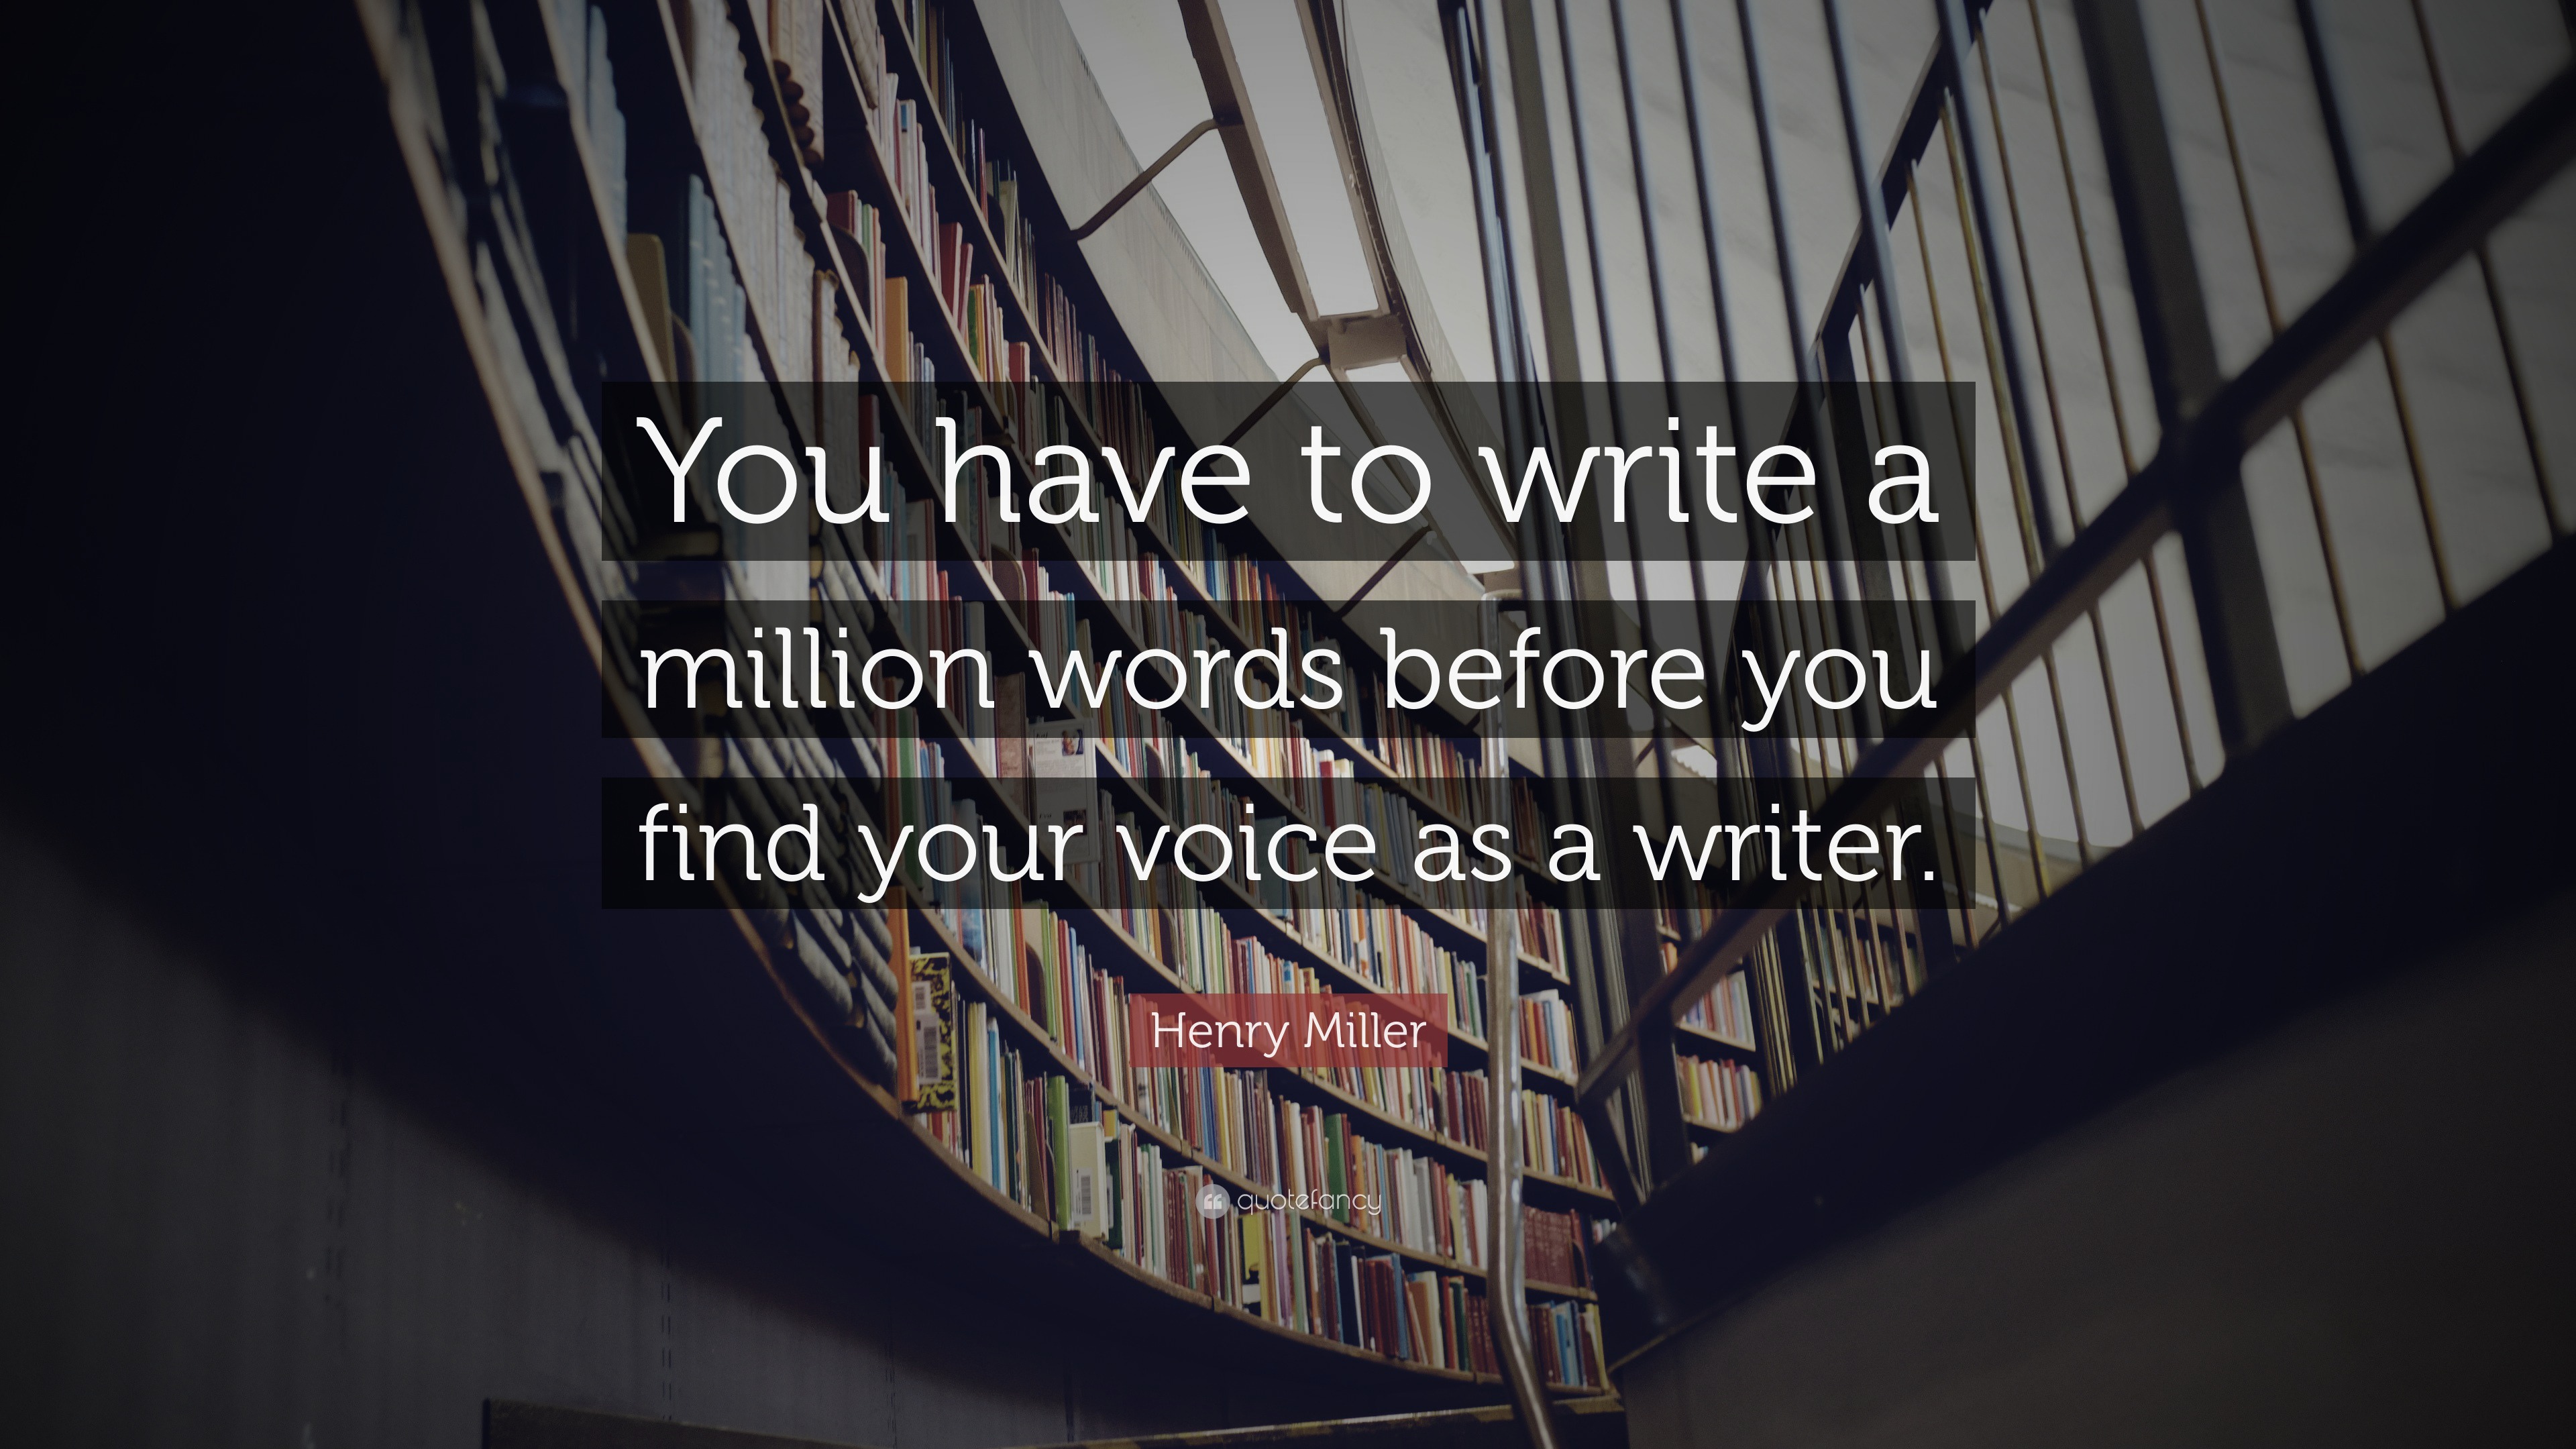 Henry Miller Quote: “You have to write a million words before you find